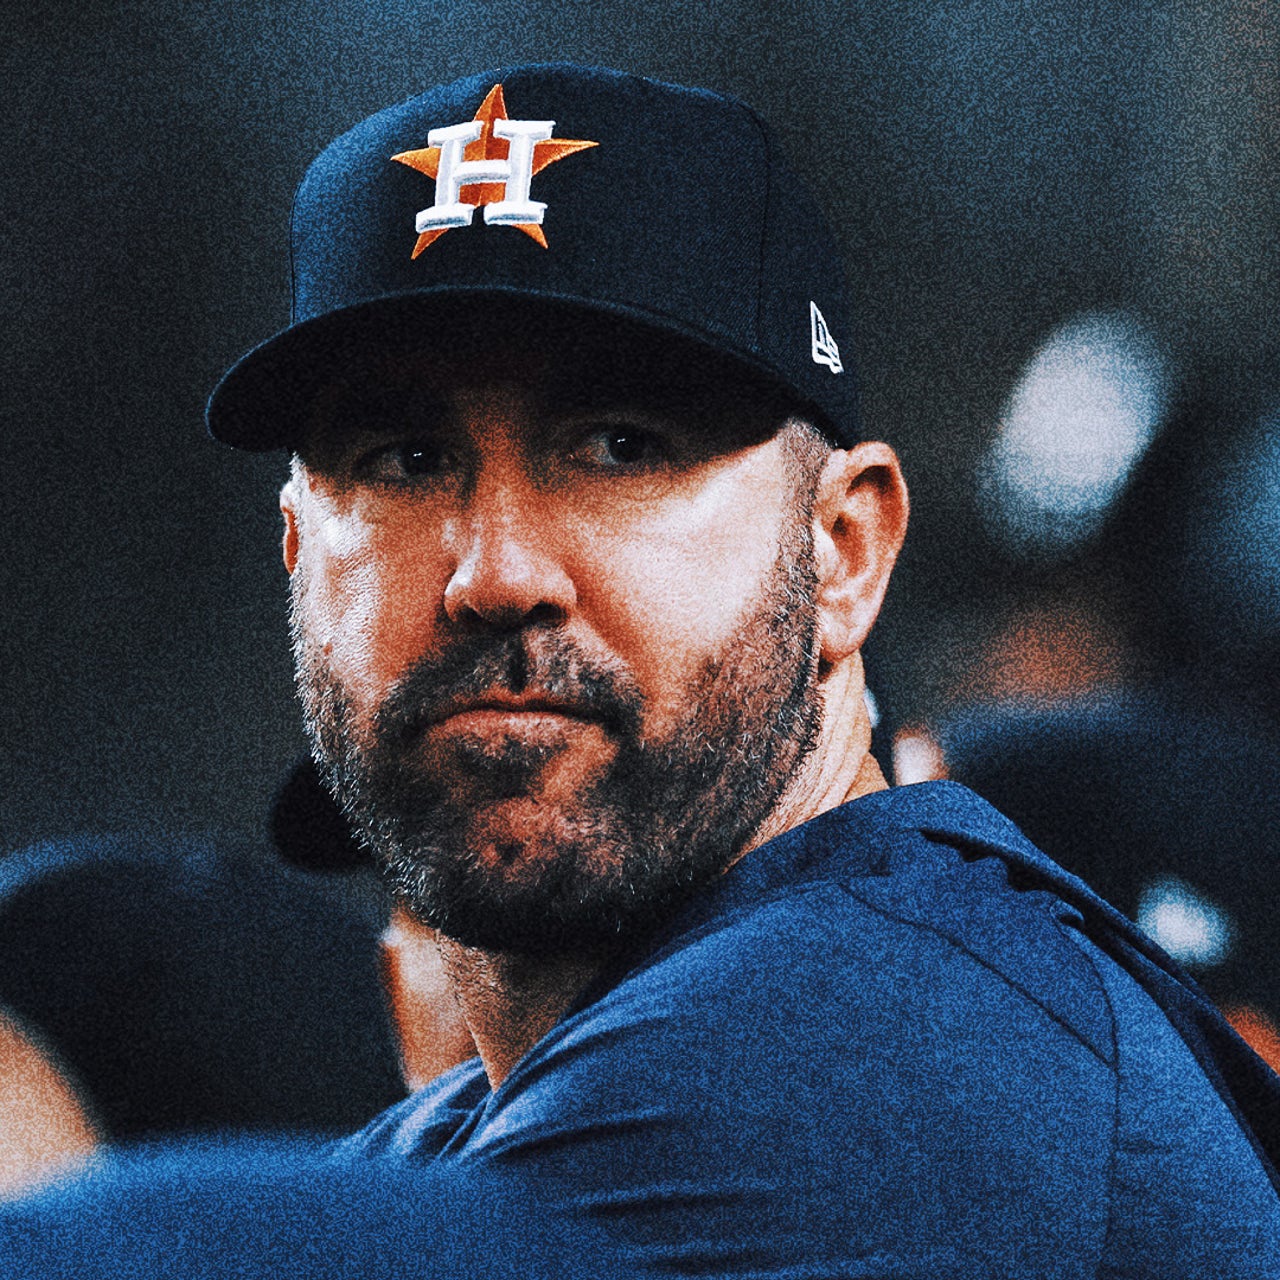 Justin Verlander brings World Series hope to Astros and city of Houston